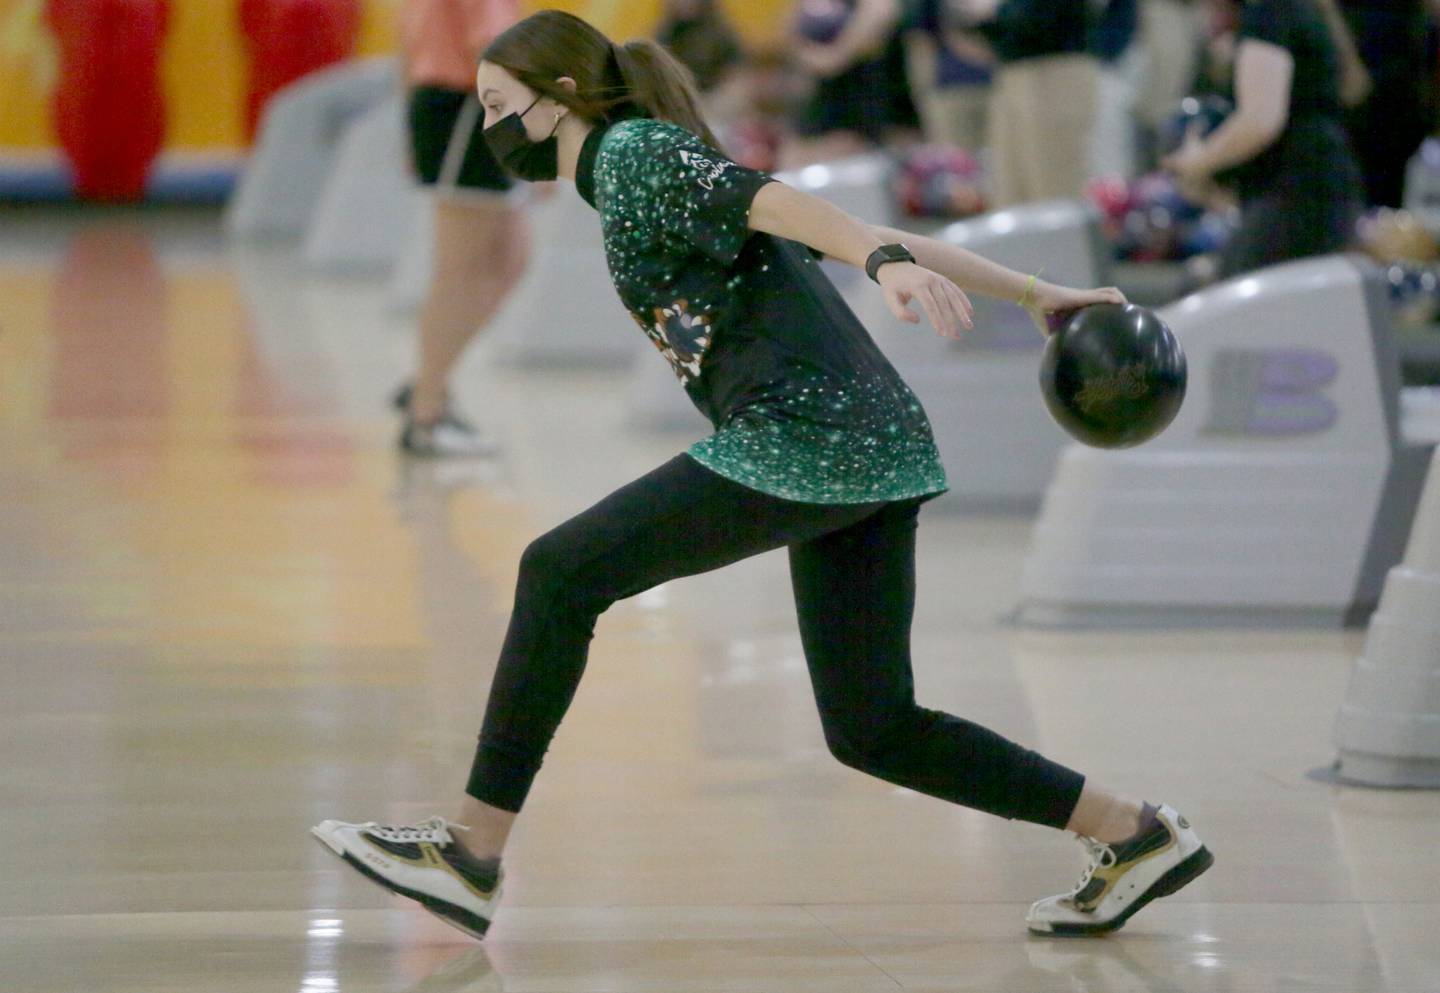 St. Bede's Aubree Acuncius bowls during the La Salle-Peru Sectional held at Illinois Valley Super Bowl on Saturday, Feb. 12, 2022 in Peru.